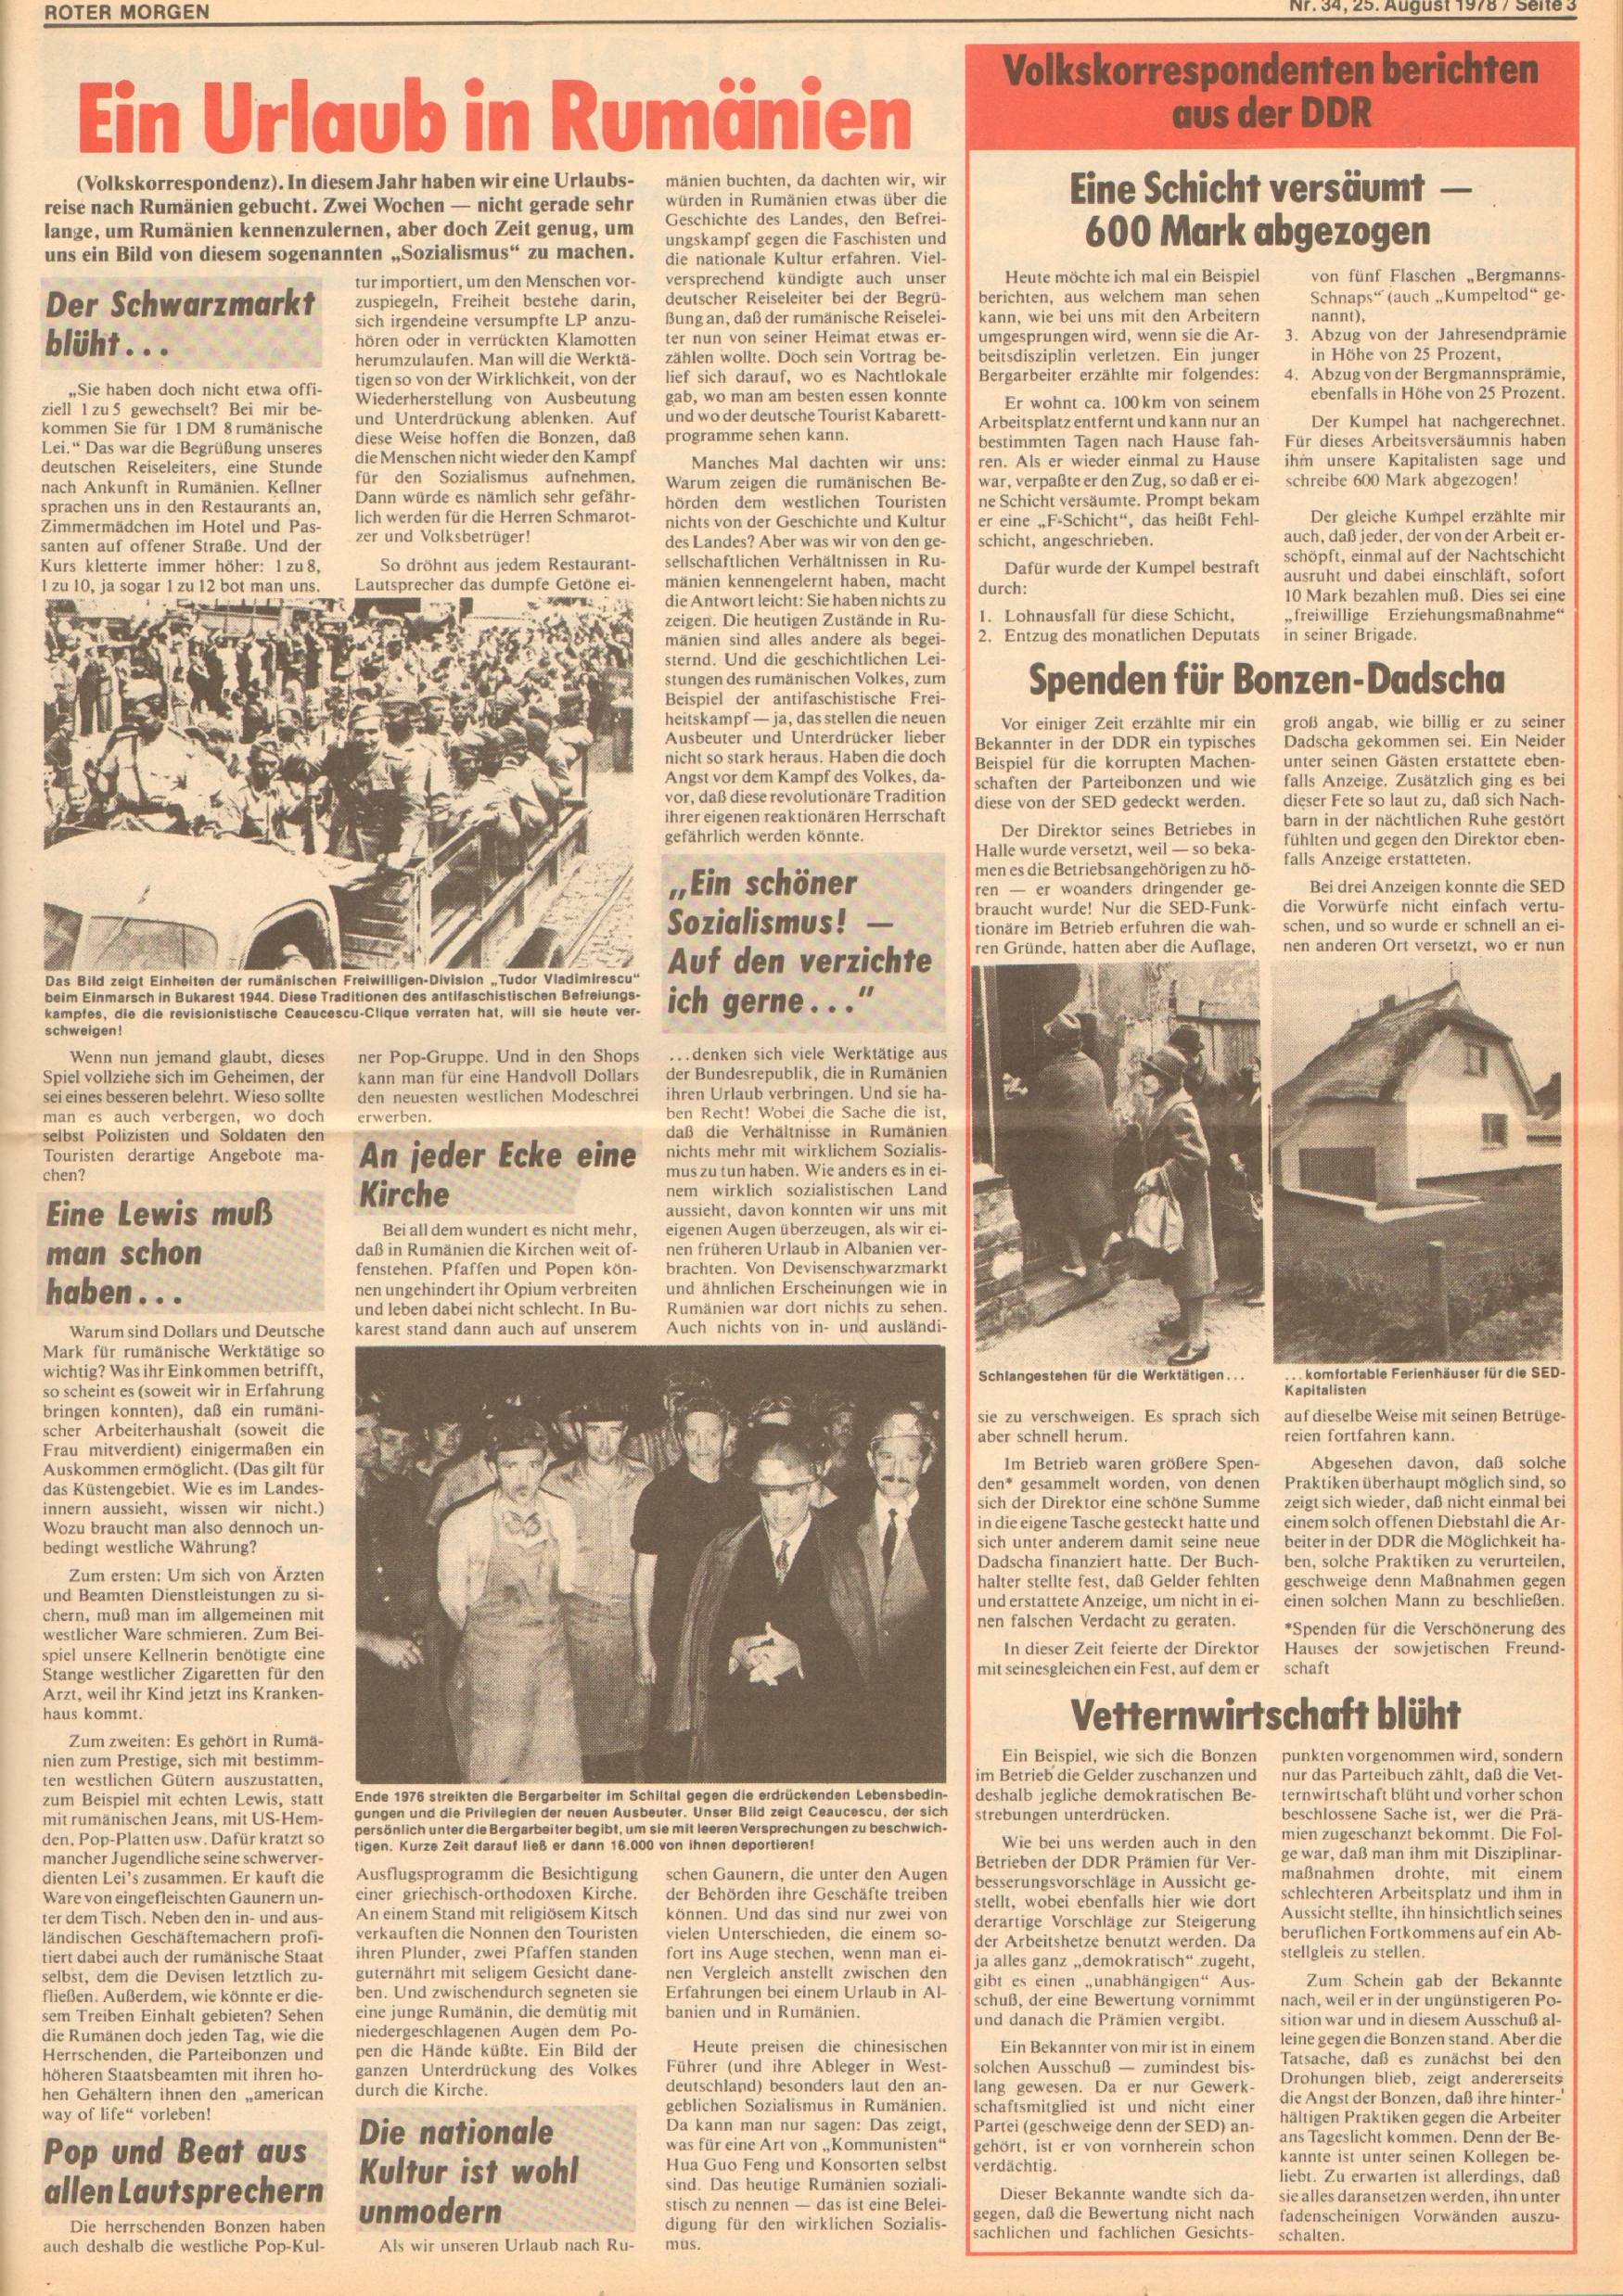 Roter Morgen, 12. Jg., 25. August 1978, Nr. 34, Seite 3